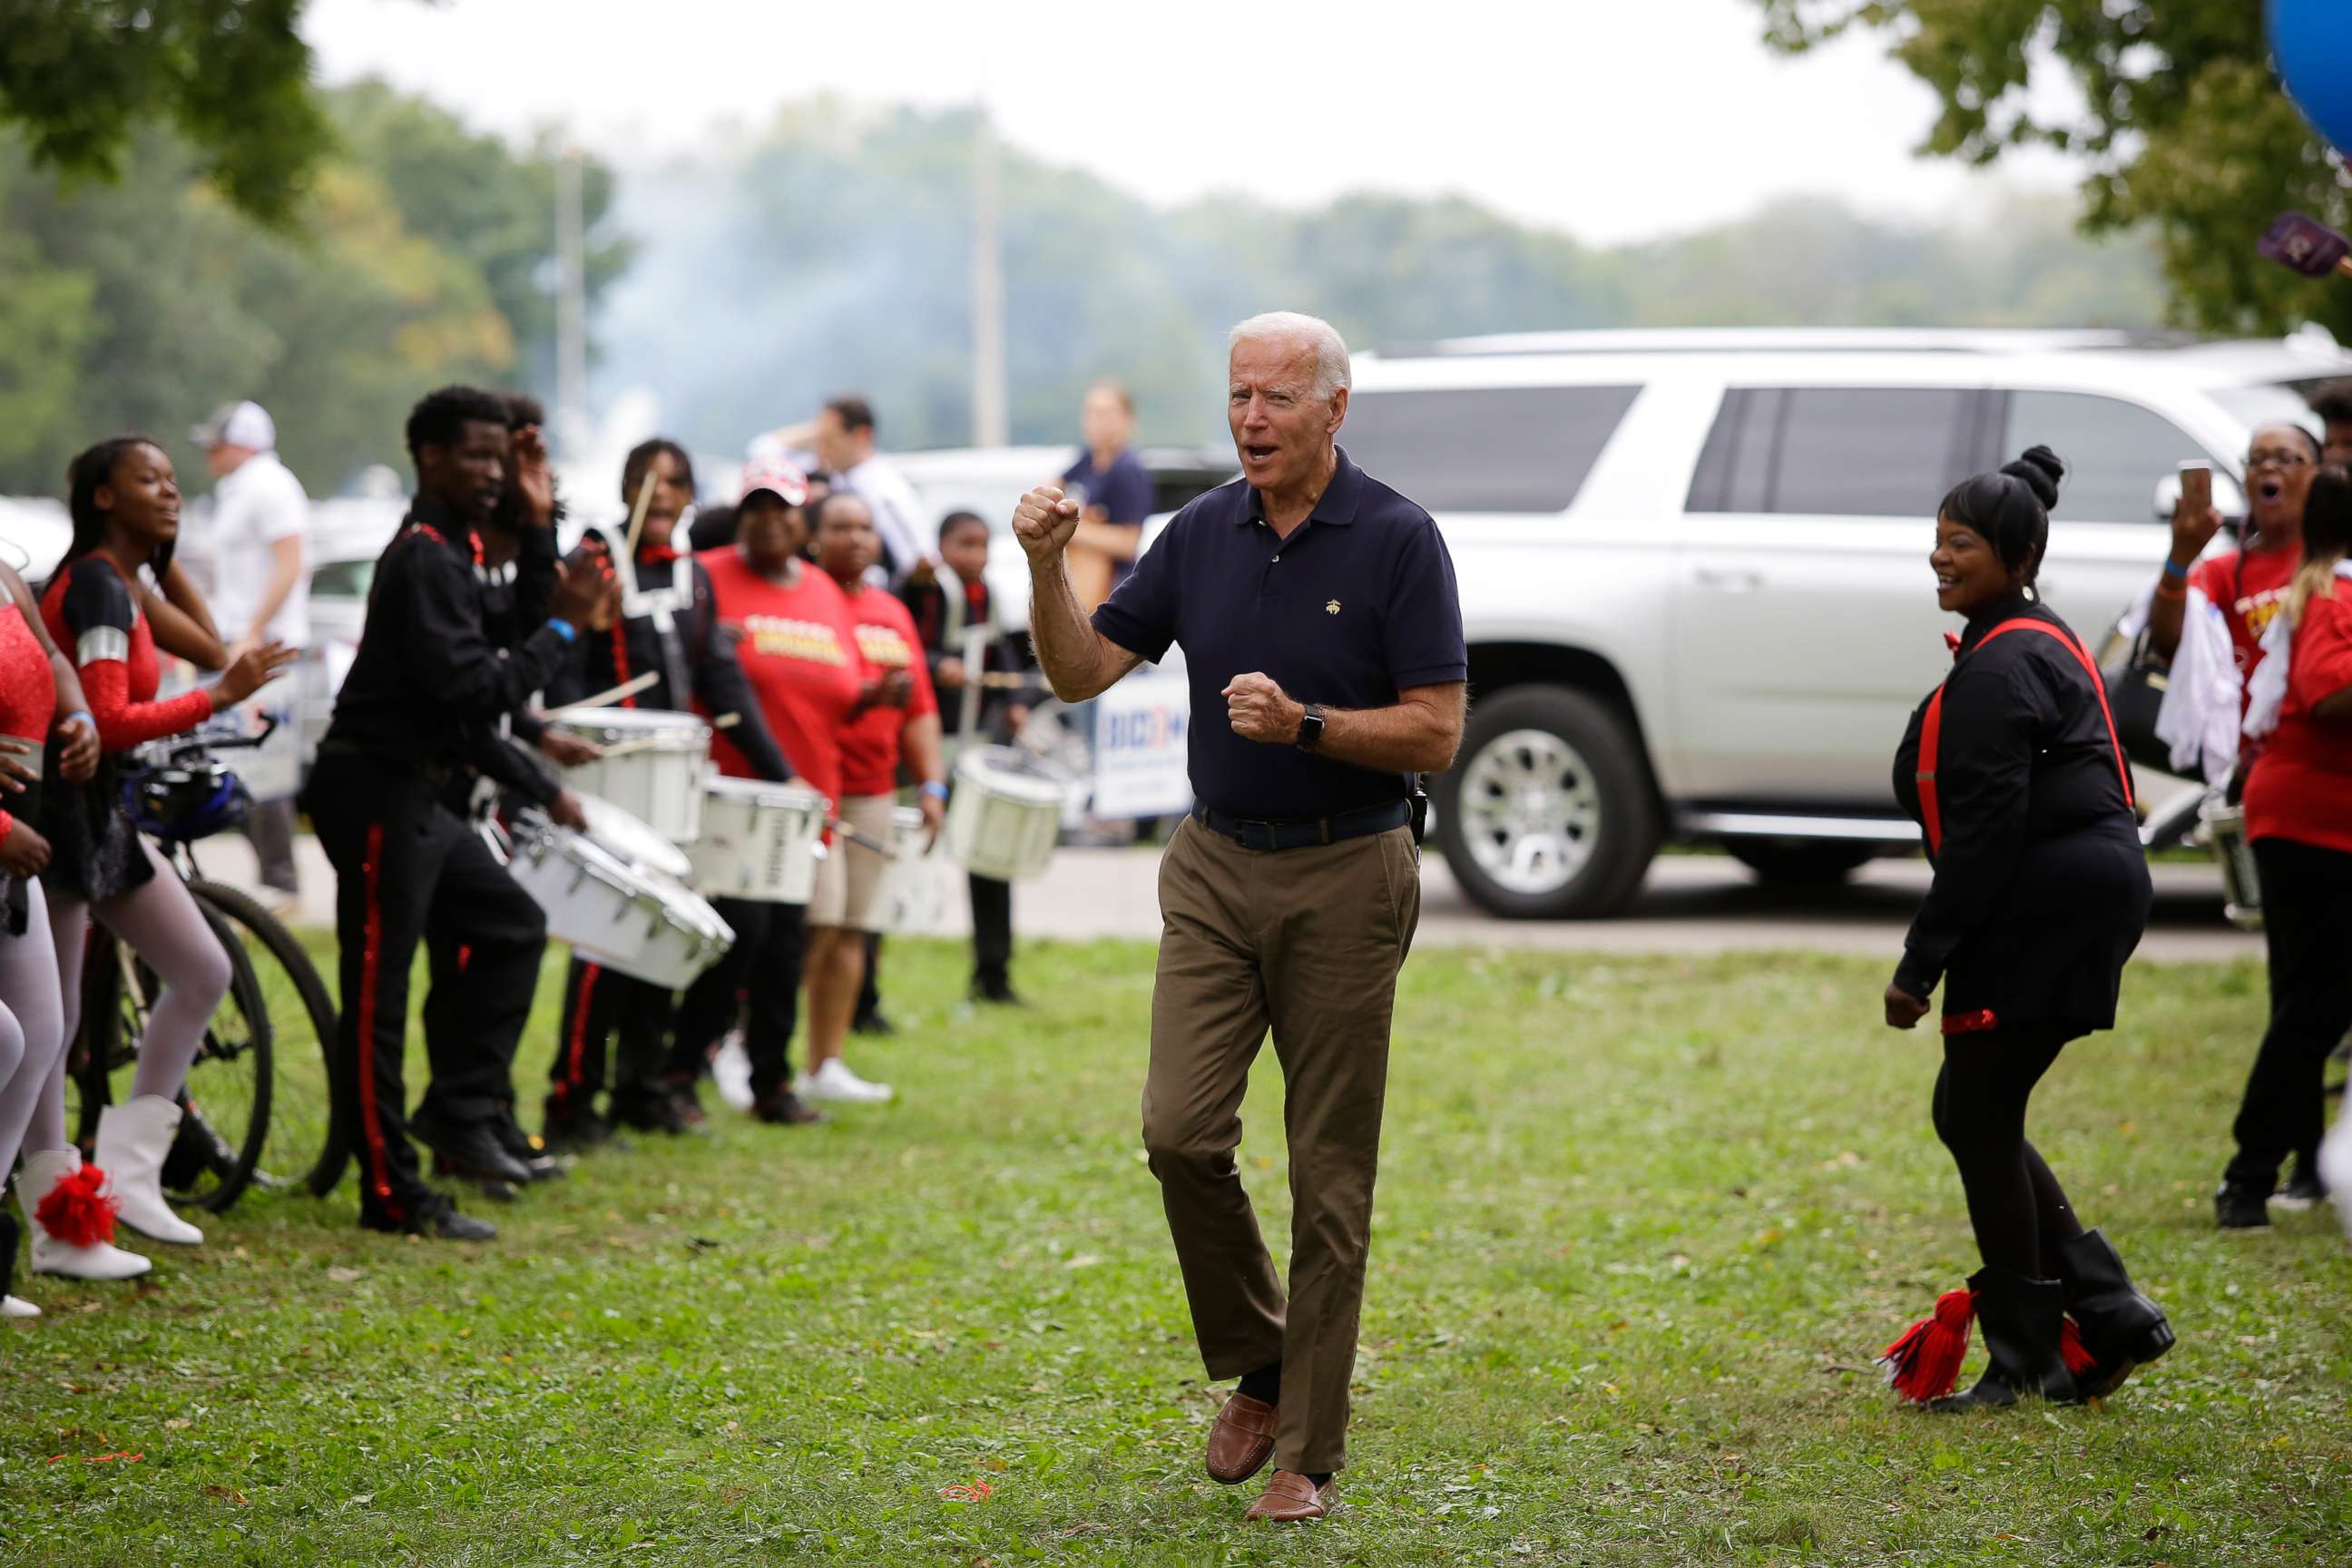 PHOTO: Former Vice President and presidential candidate Joe Biden clinches his fist as he arrives during the Democratic Polk County Steak Fry on Sept. 21, 2019, in Des Moines, Iowa.